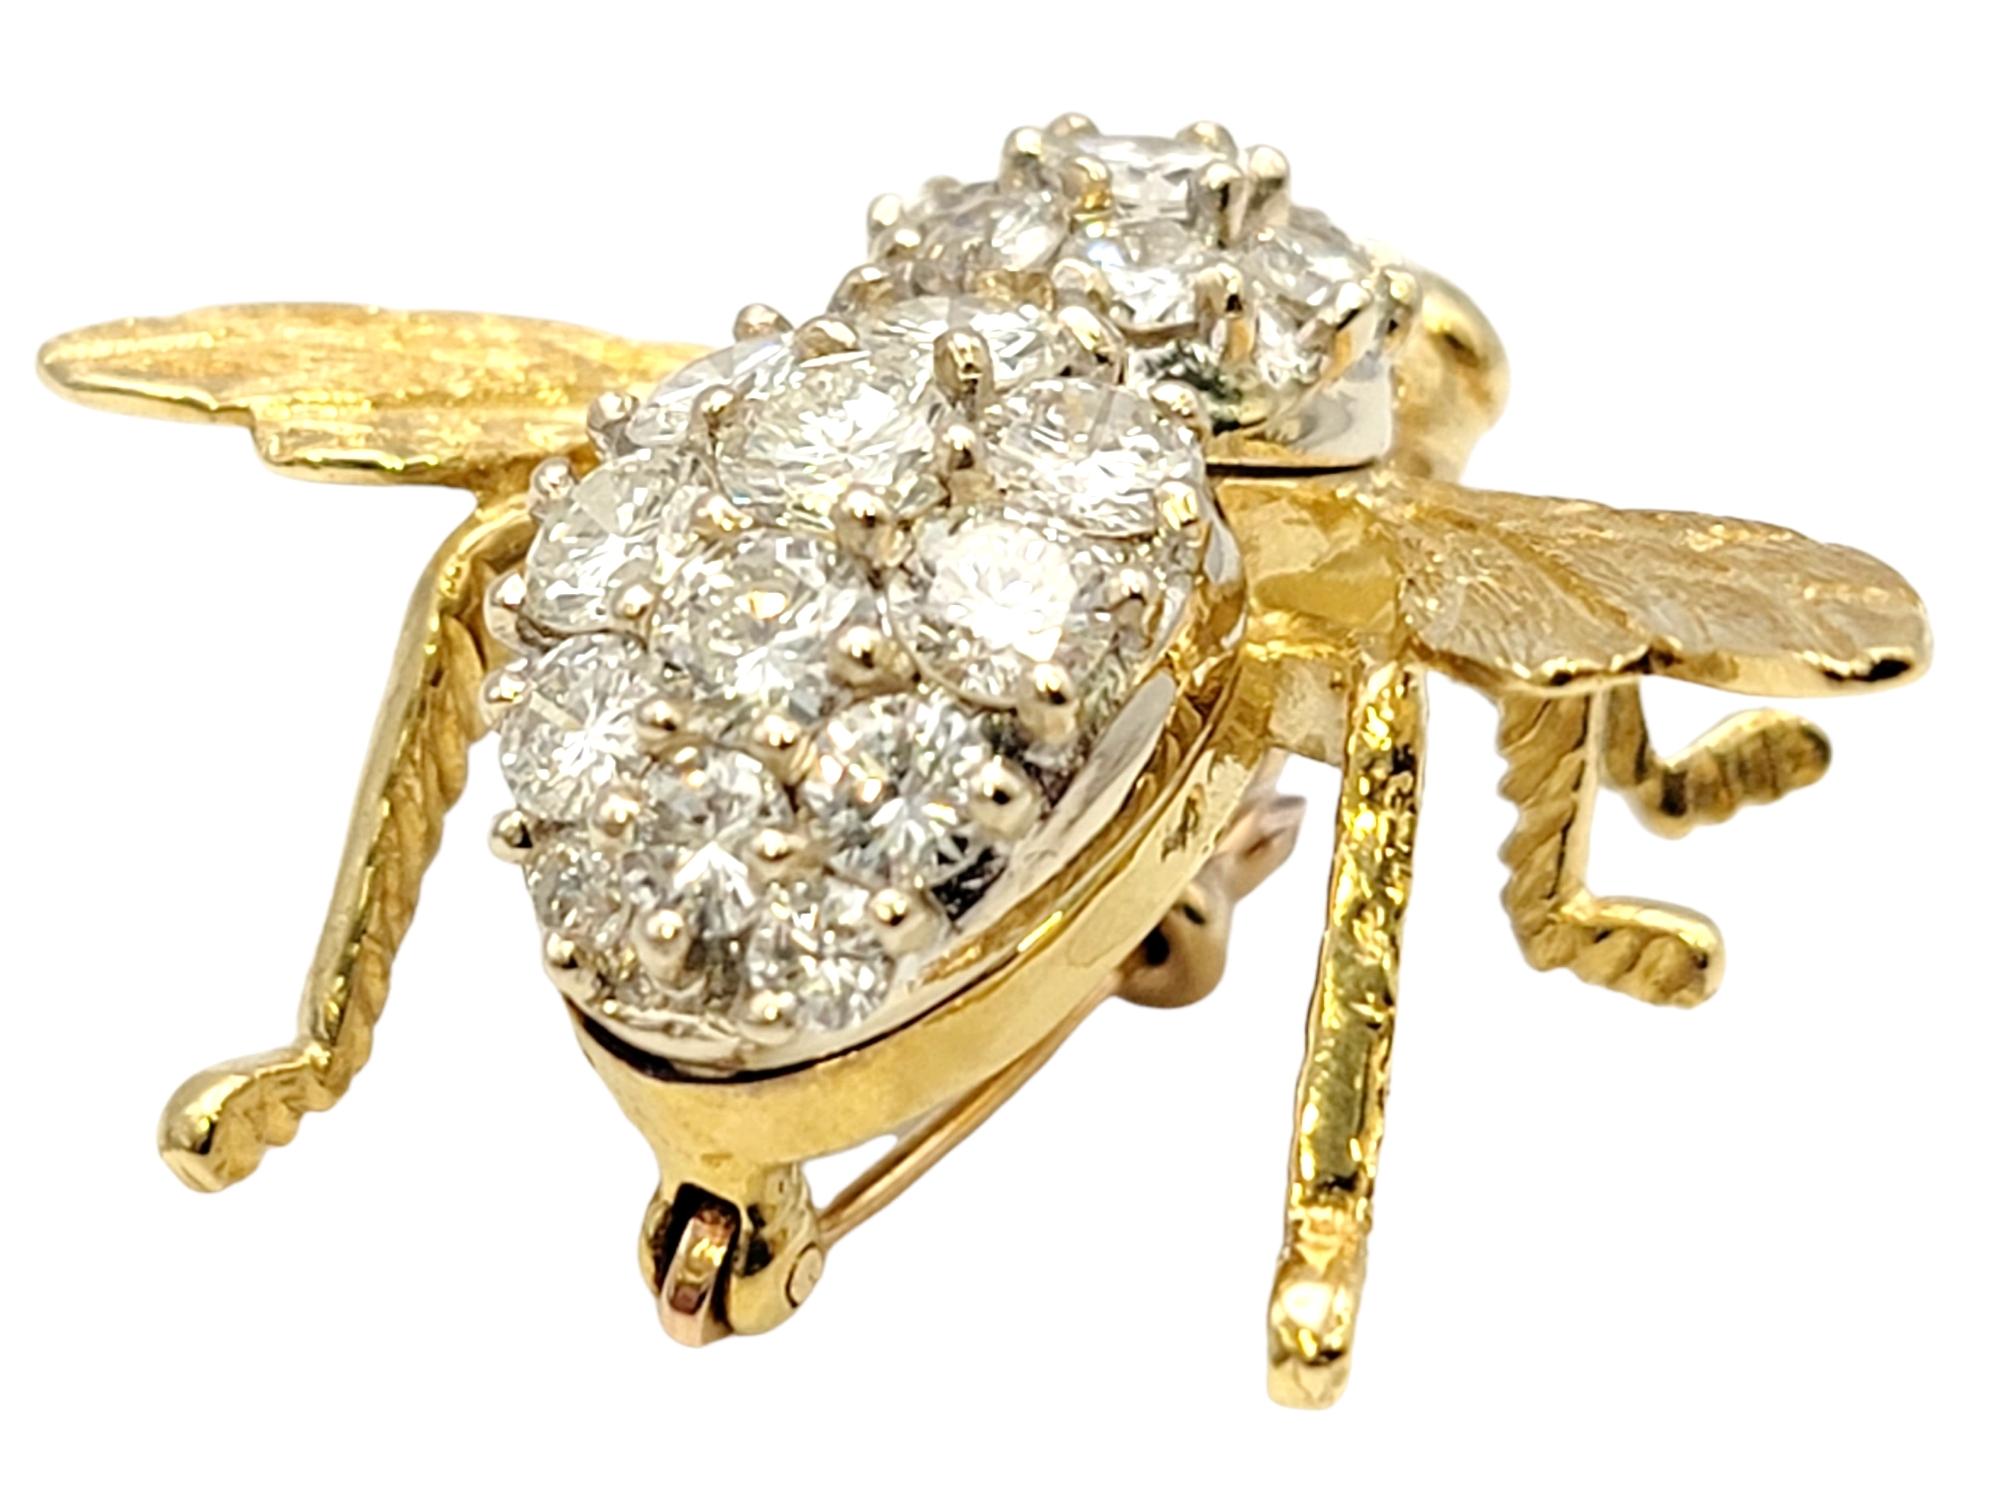 Contemporary Vintage Herbert Rosenthal Diamond and Ruby 3D Bee Brooch in 18 Karat Yellow Gold For Sale